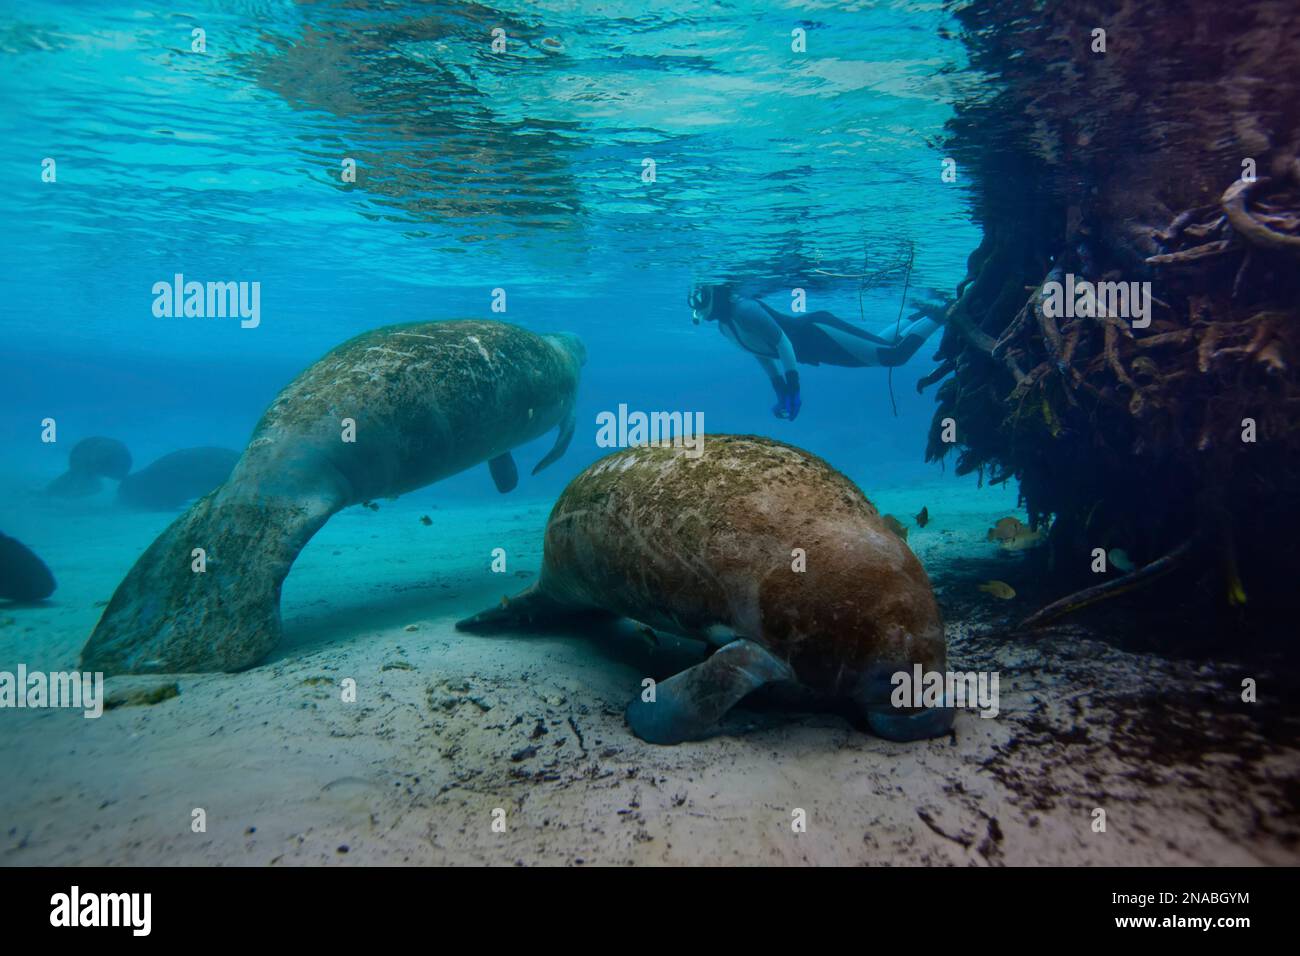 A snorkeler swims near four West Indian Manatees. Stock Photo